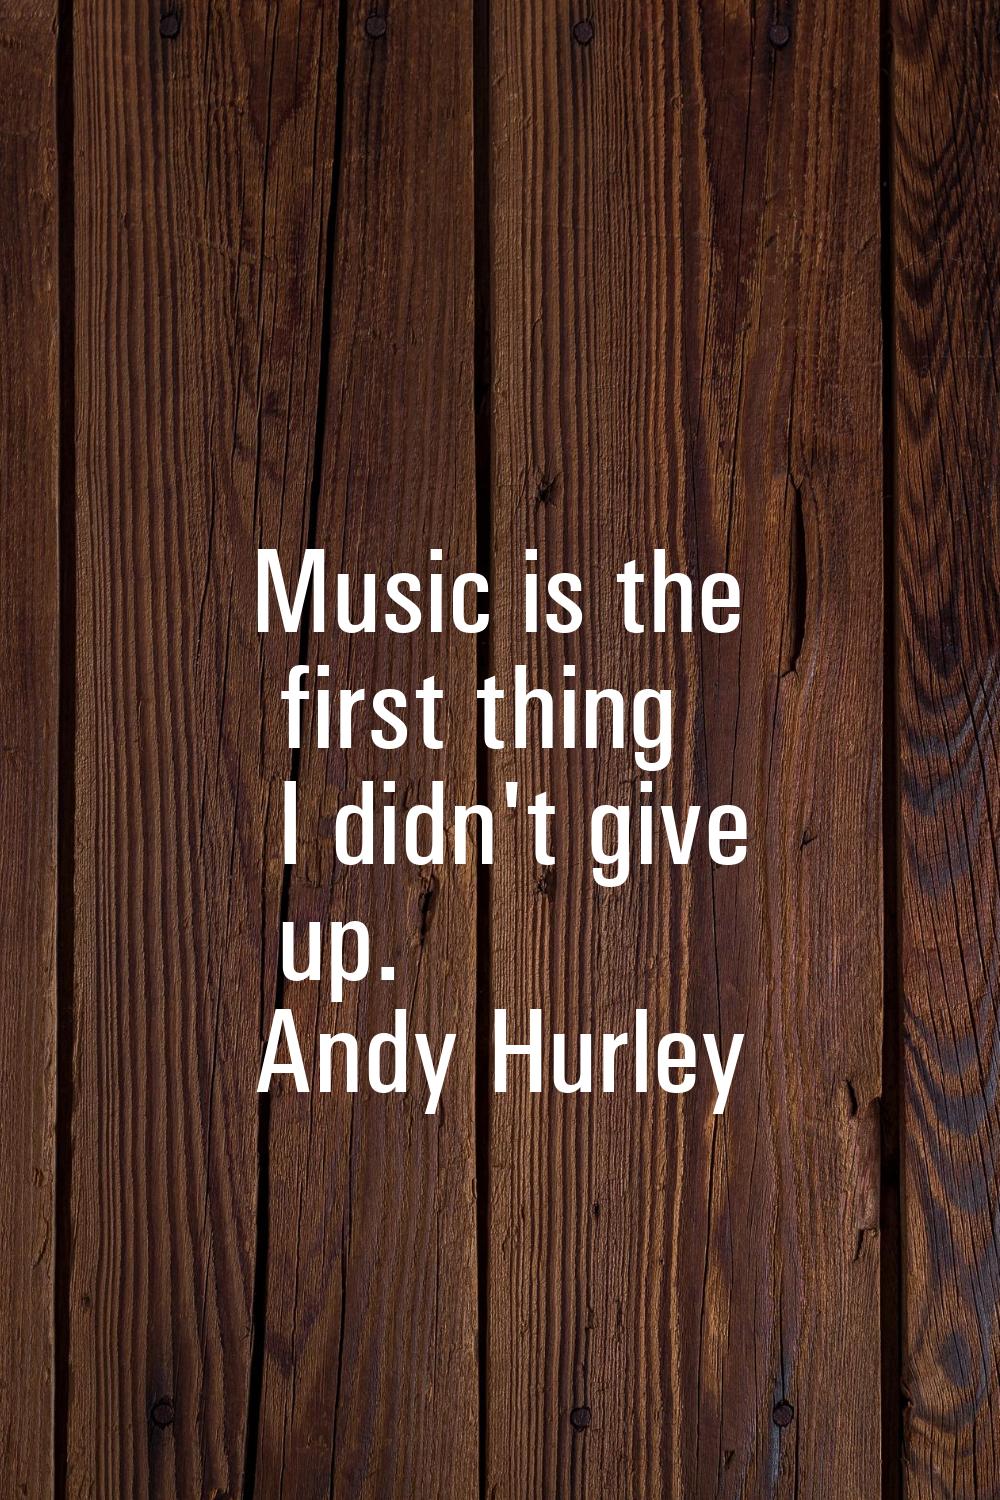 Music is the first thing I didn't give up.